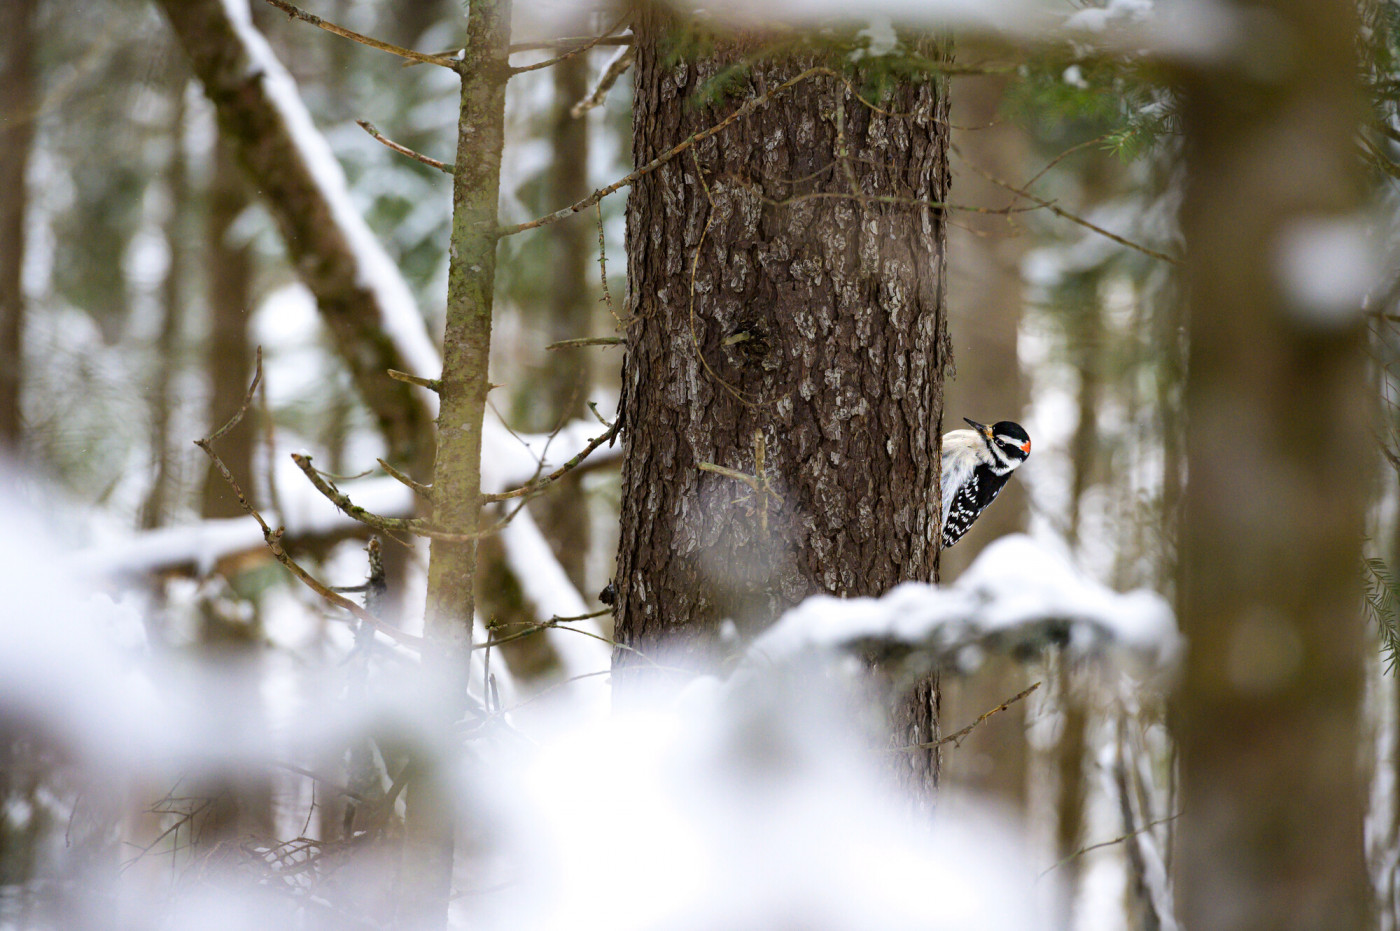 A black and white woodpecker with red on his head on a snowy tree.